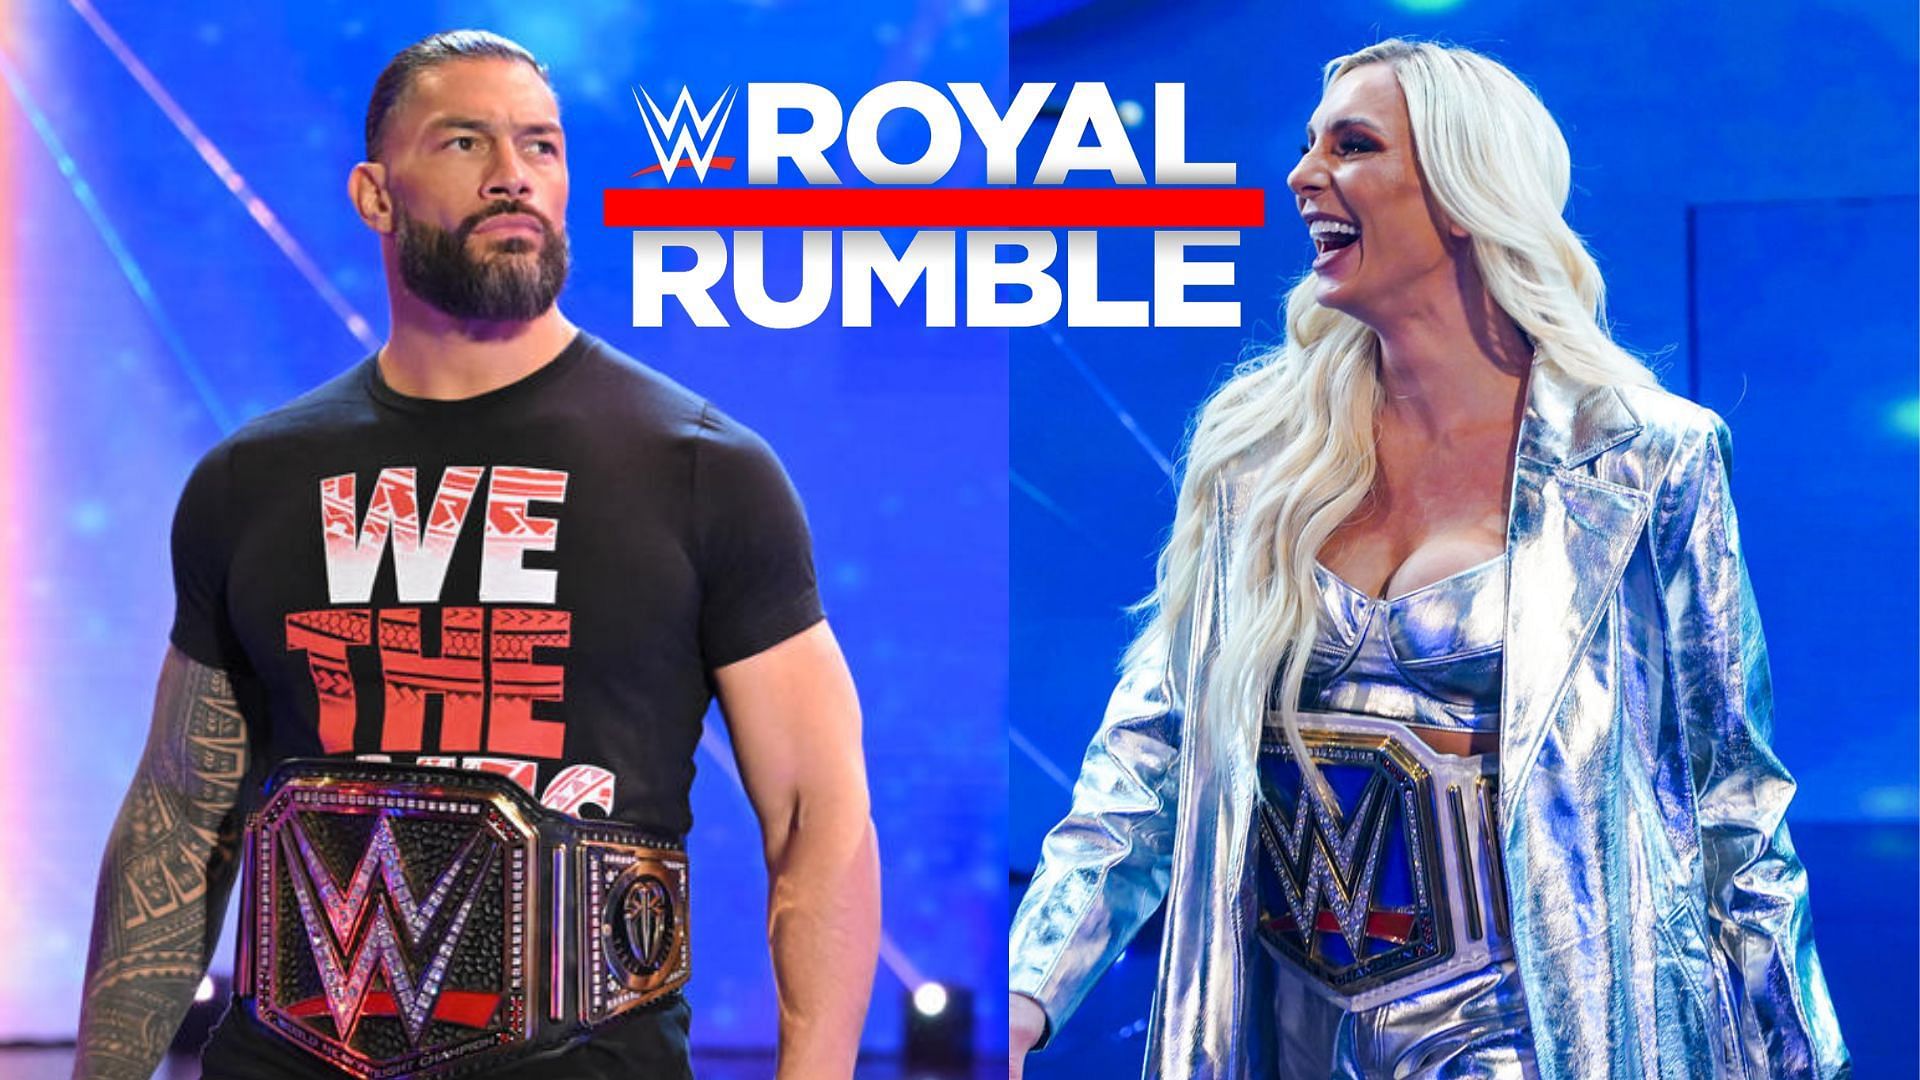 Roman Reigns and Charlotte Flair are former Royal Rumble winners.